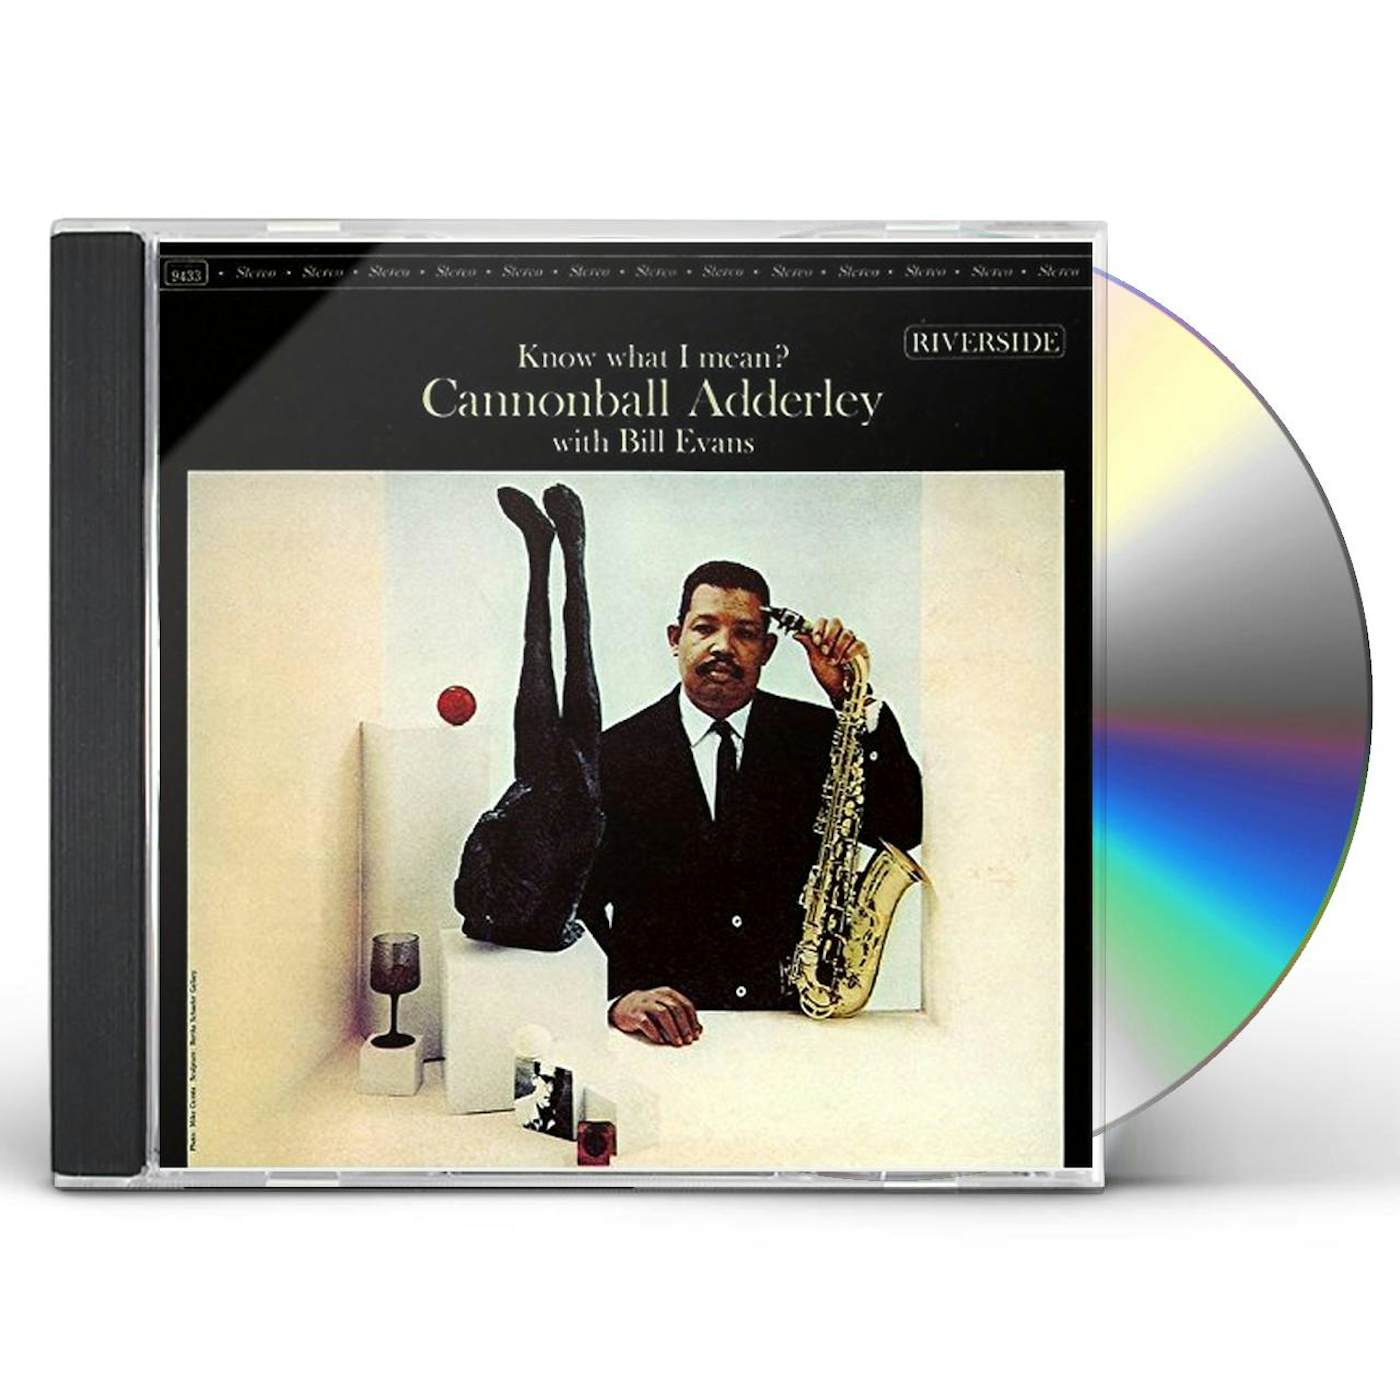 Cannonball Adderley KNOW WHAT I MEAN? CD